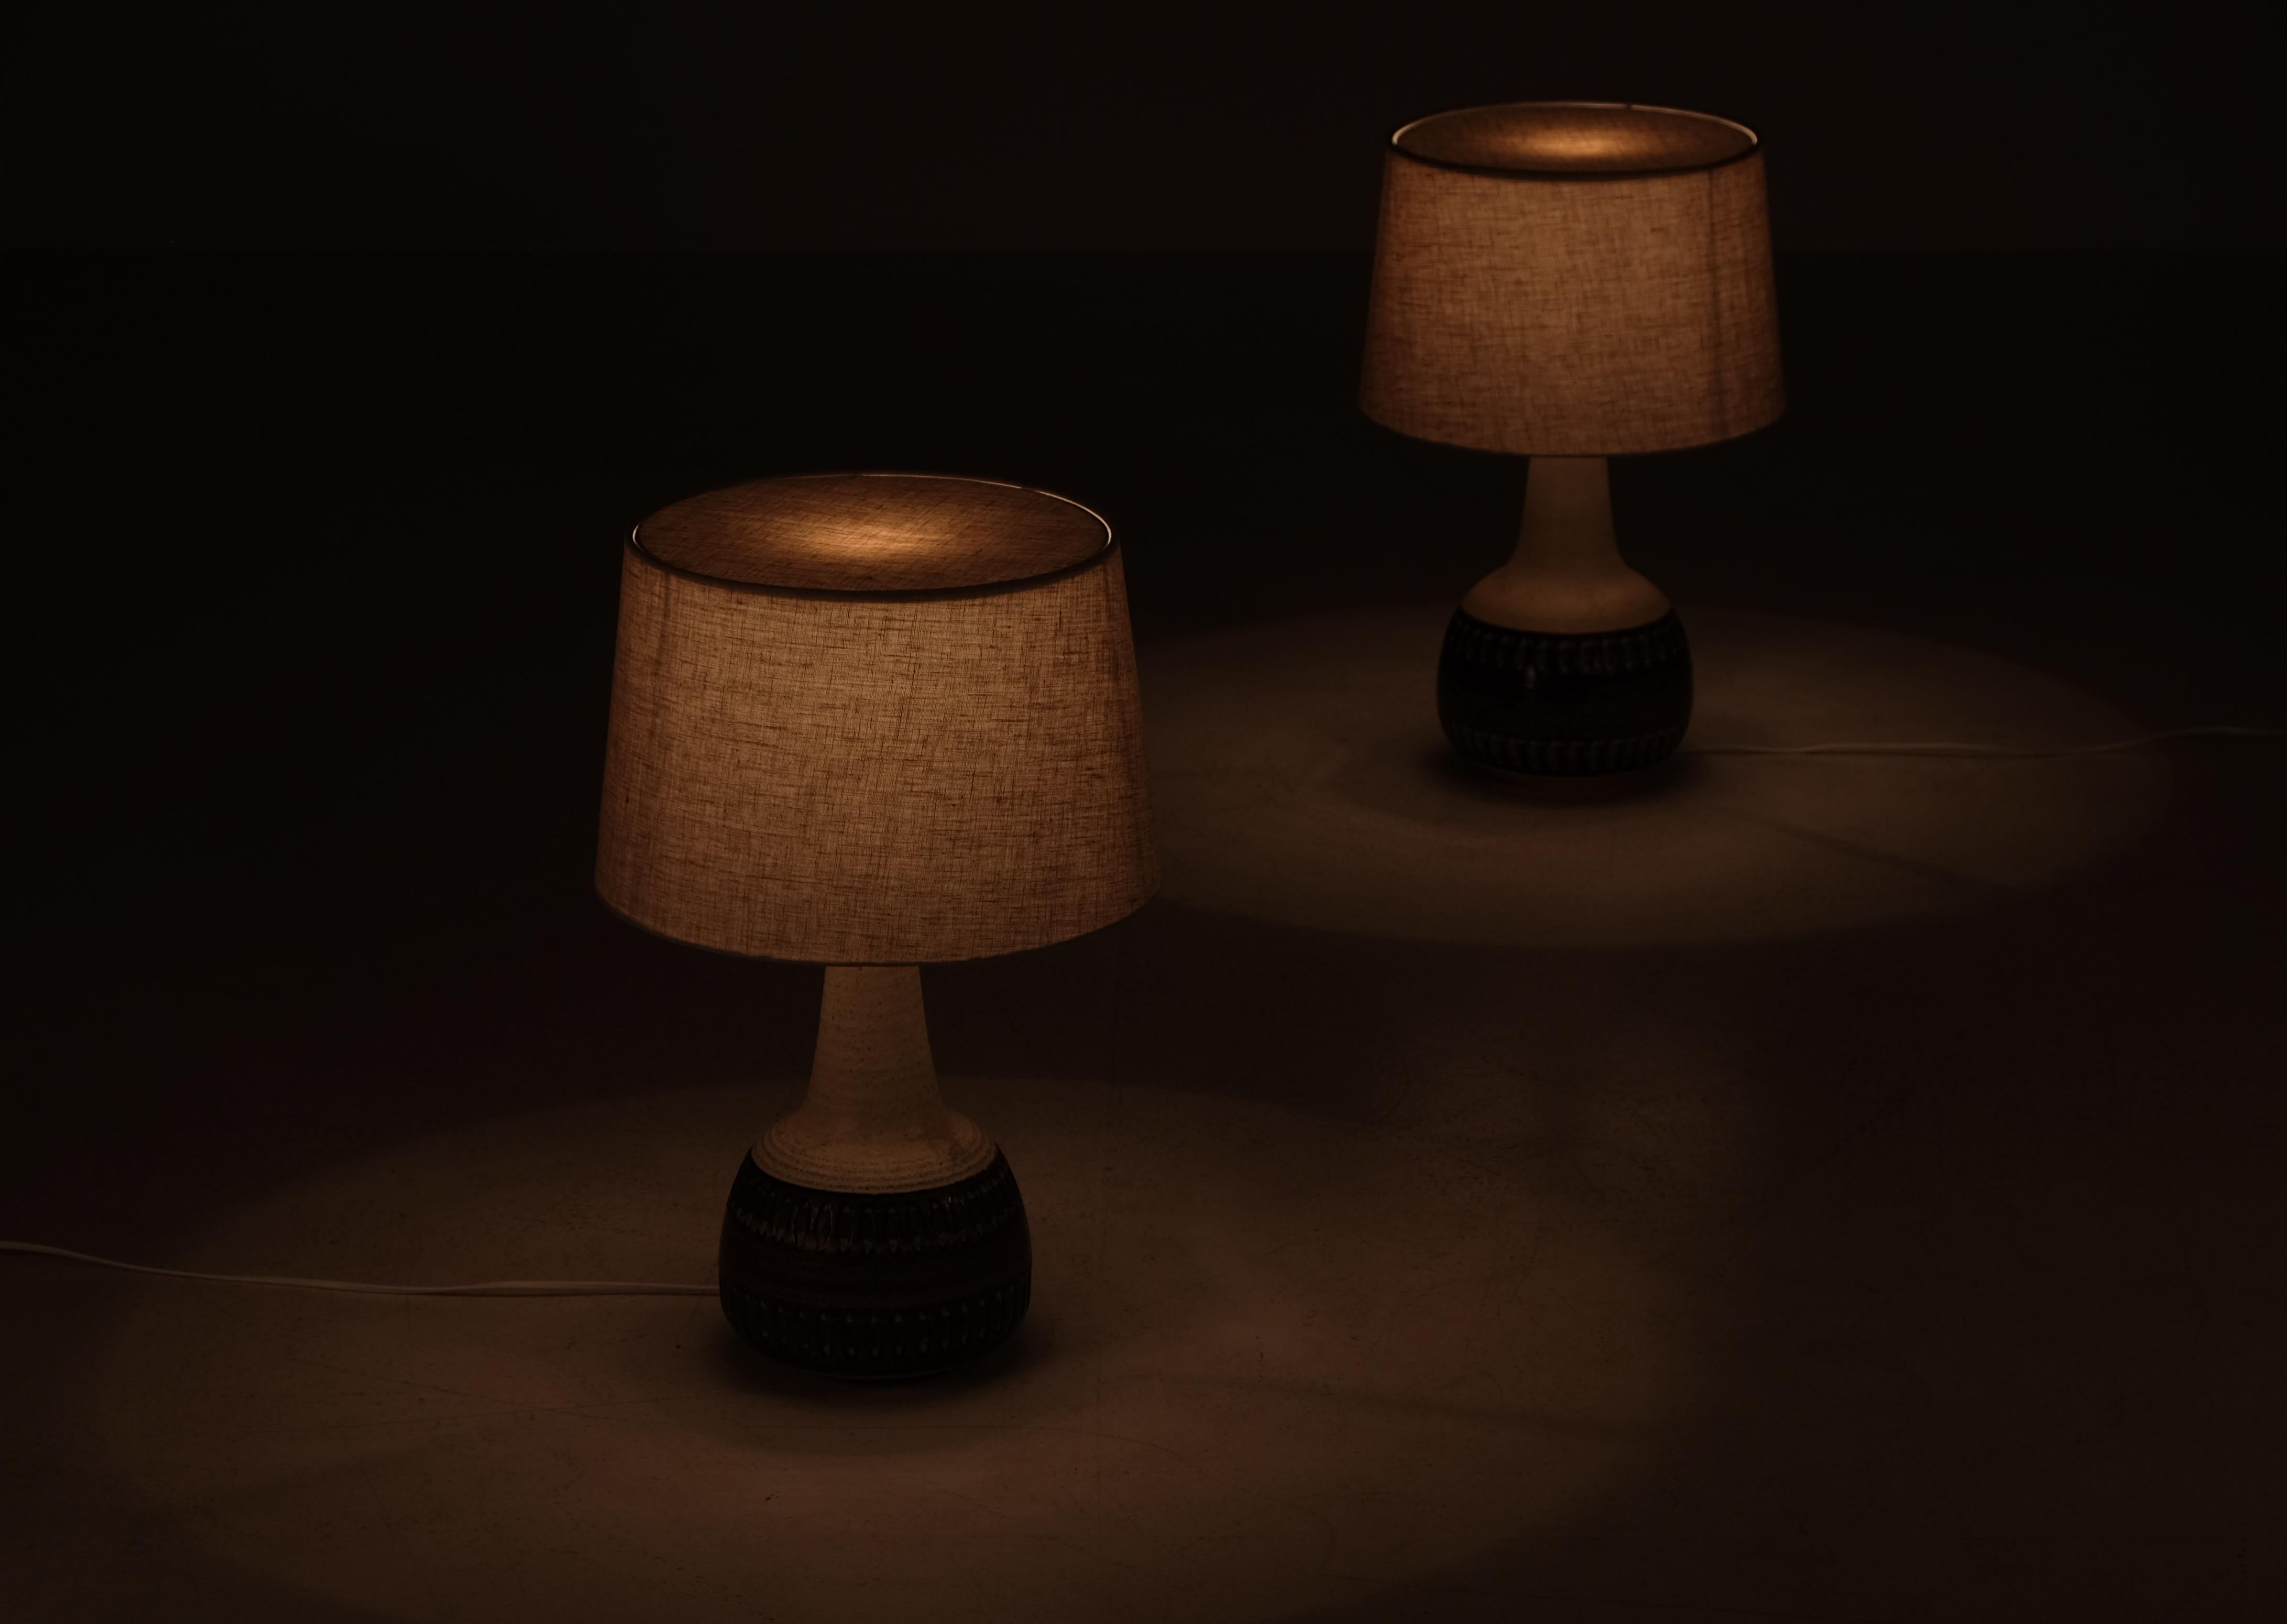 Swedish Pair of Table Lamps by Søholm Keramik, Denmark, 1960s For Sale